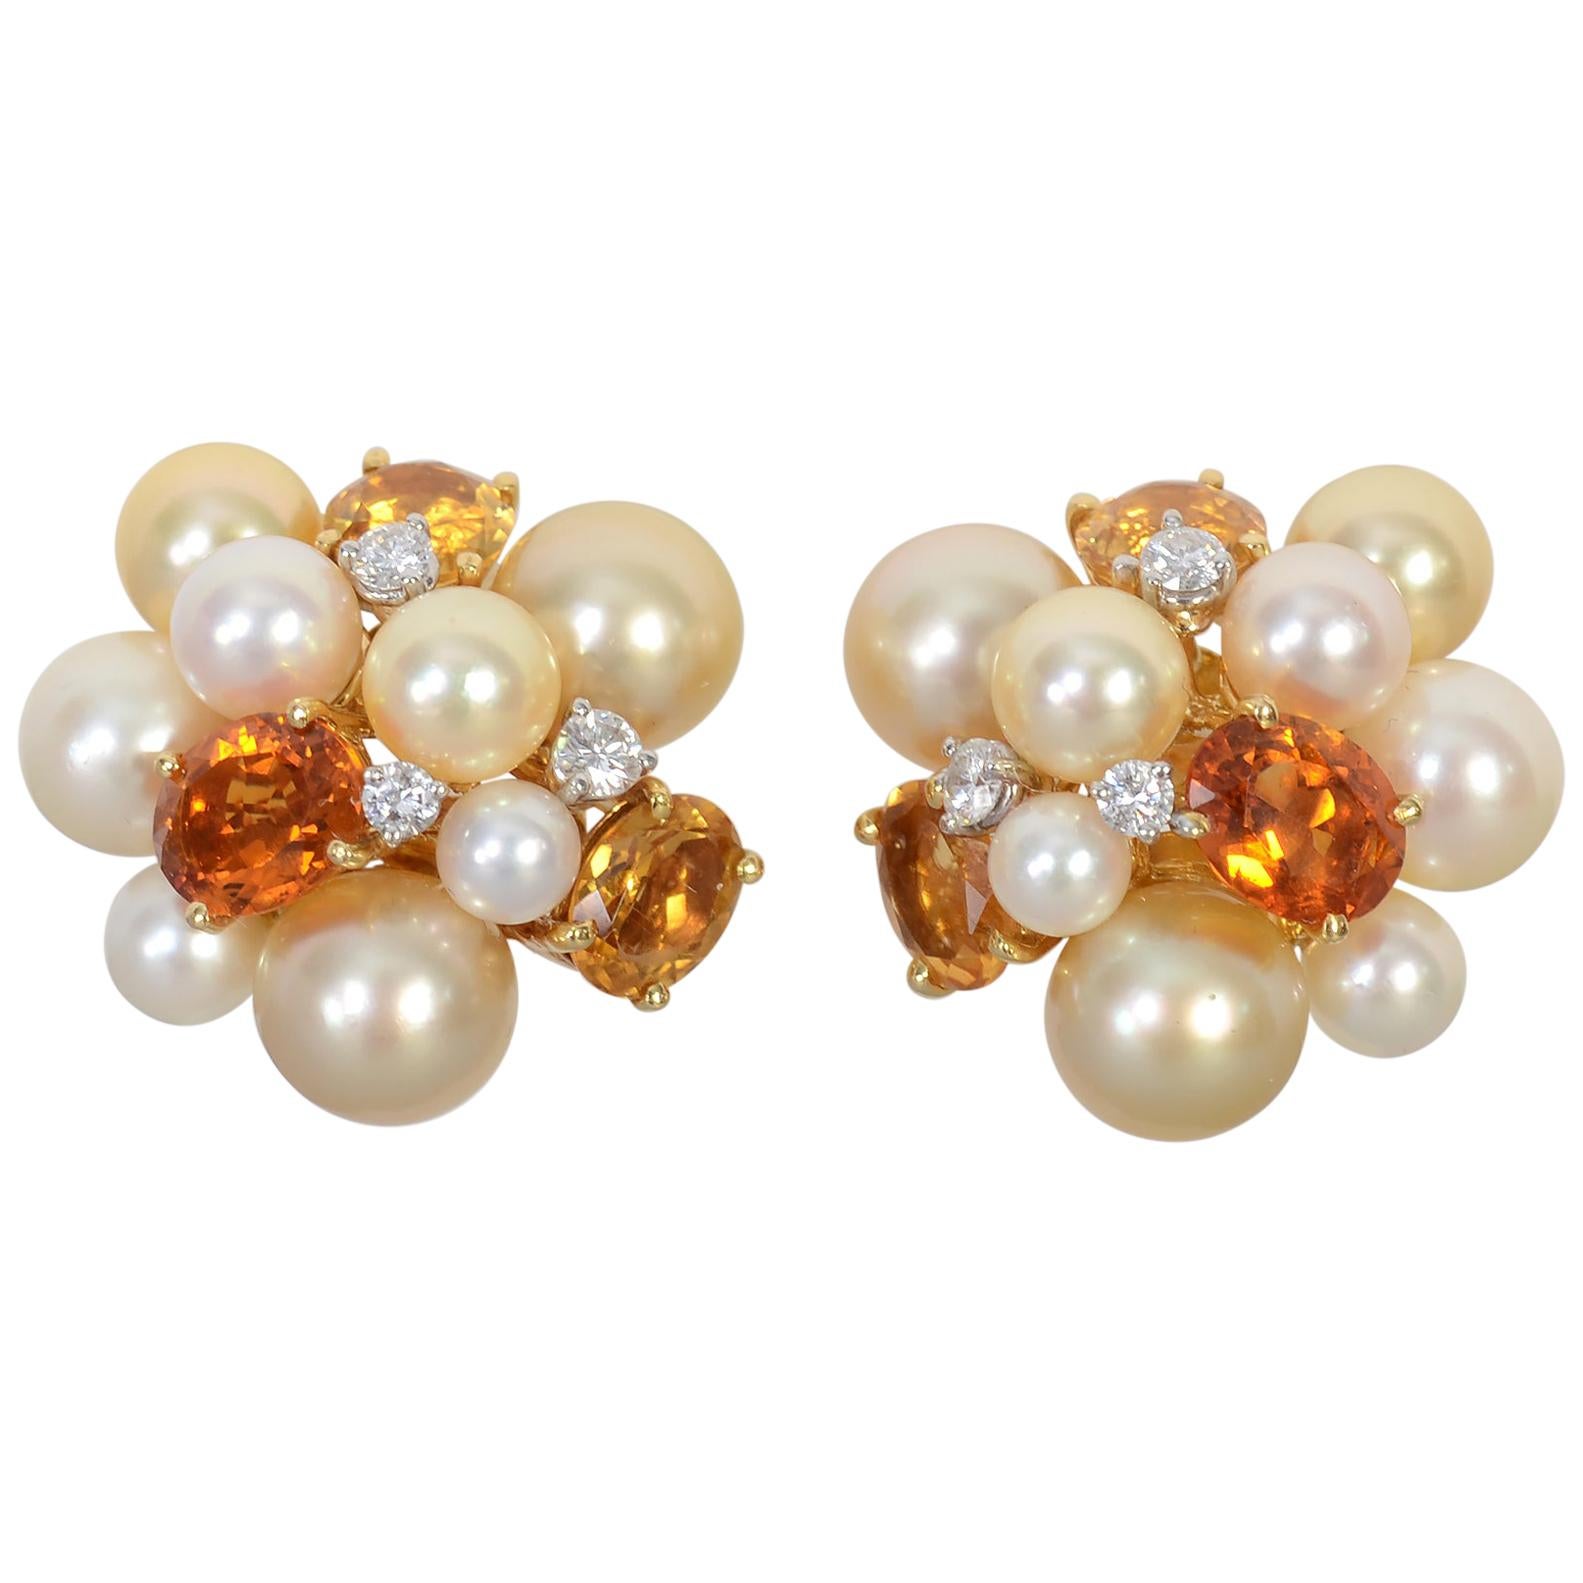 Seaman Schepps Large Bubble Pearl, Citrine and Diamond Earrings